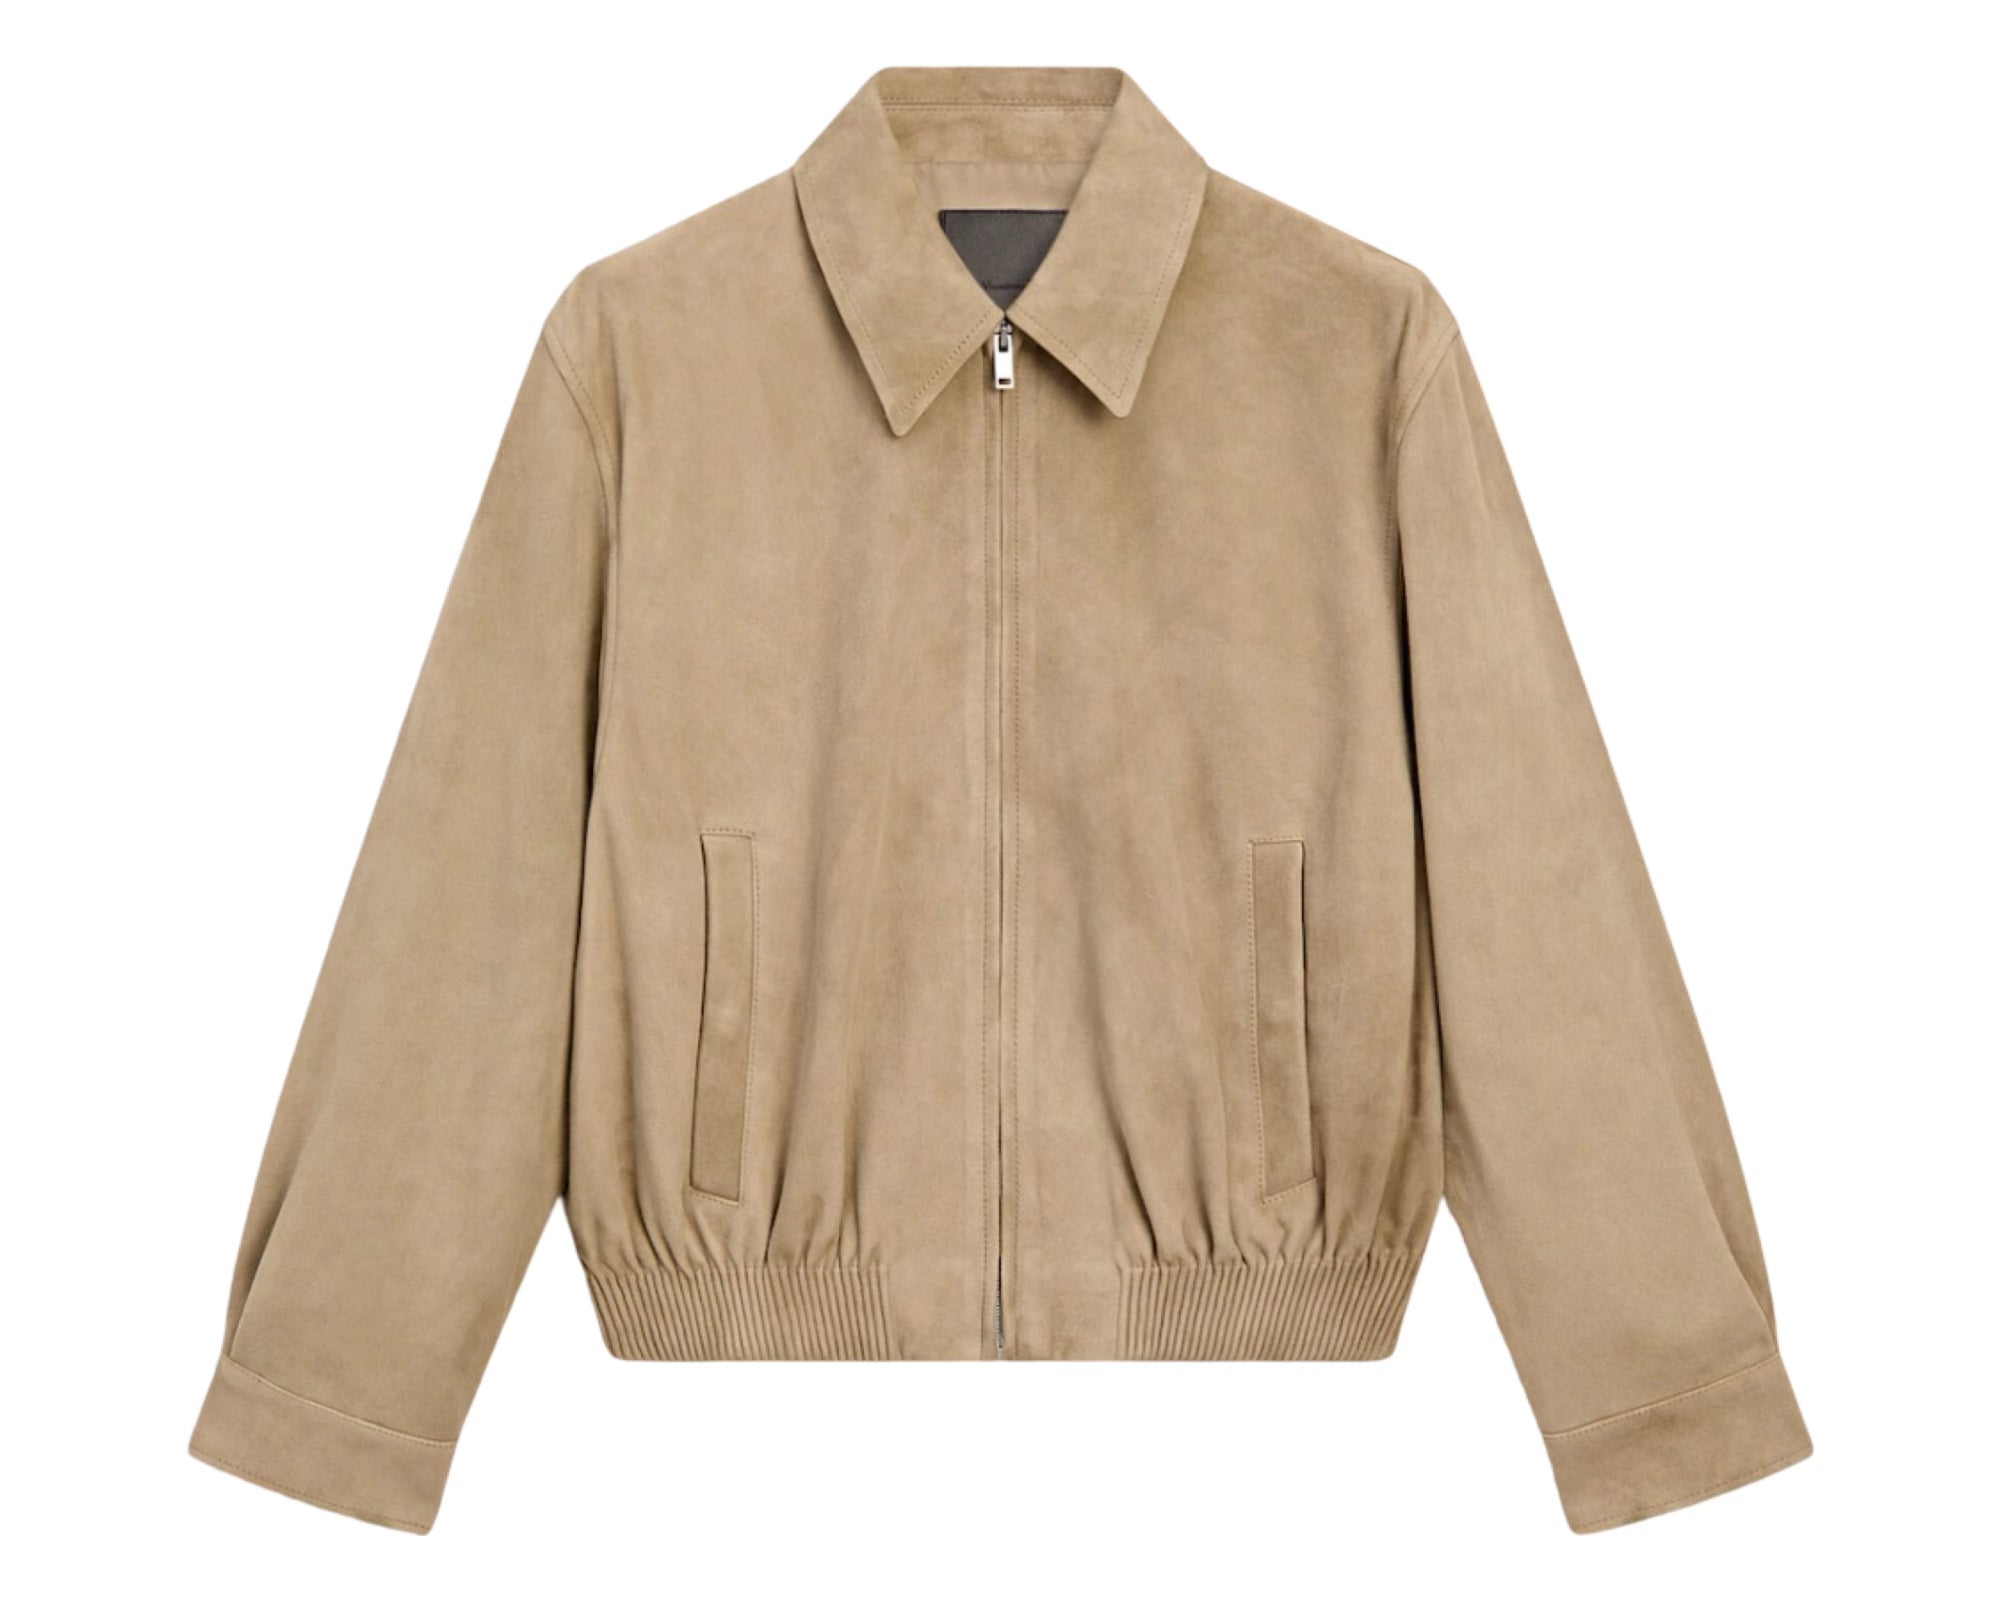 Suede Leather Bomber Jacket